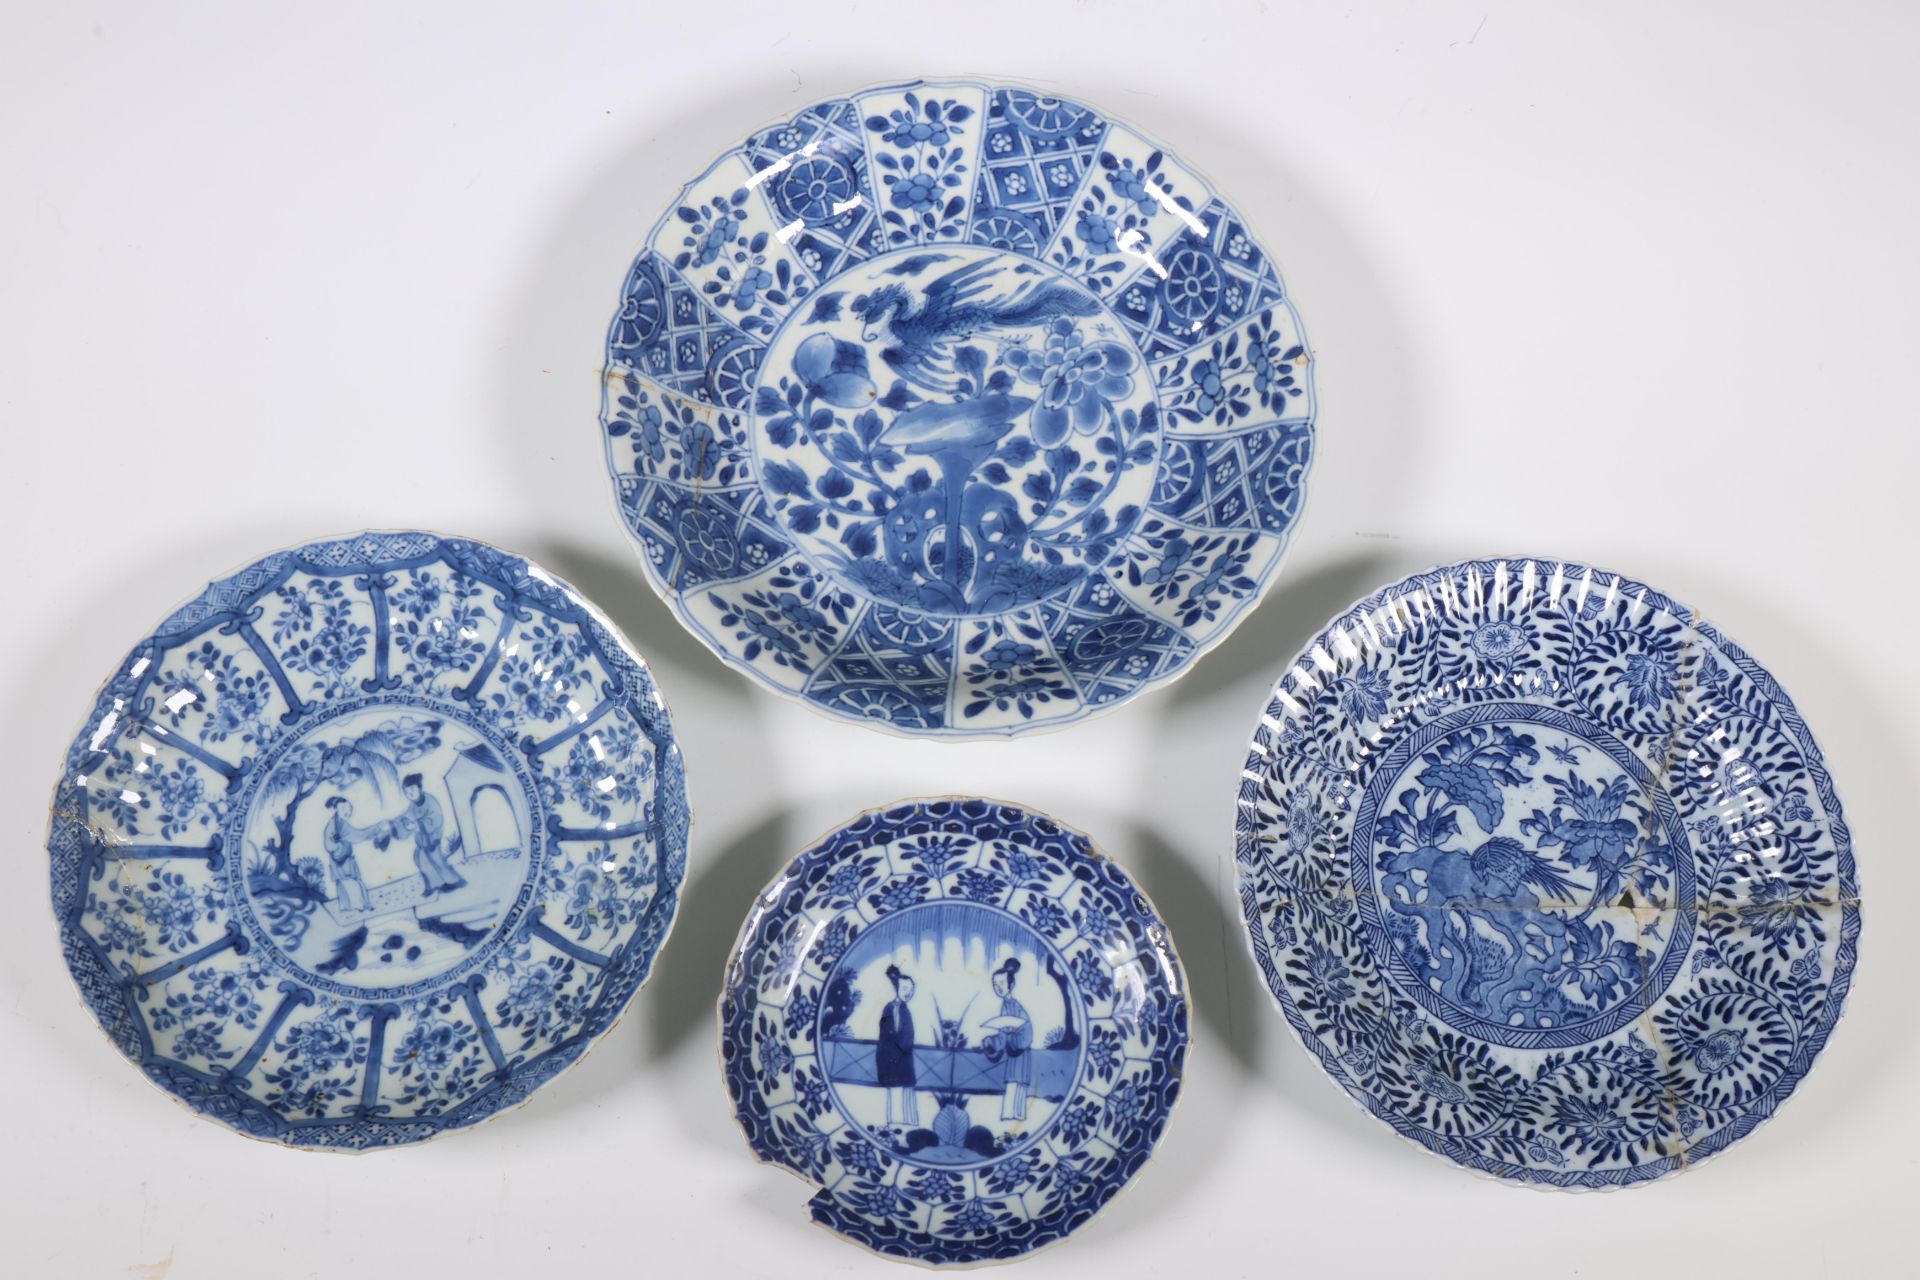 China, four various blue and white porcelain plates, Kangxi period (1662-1722) and later,